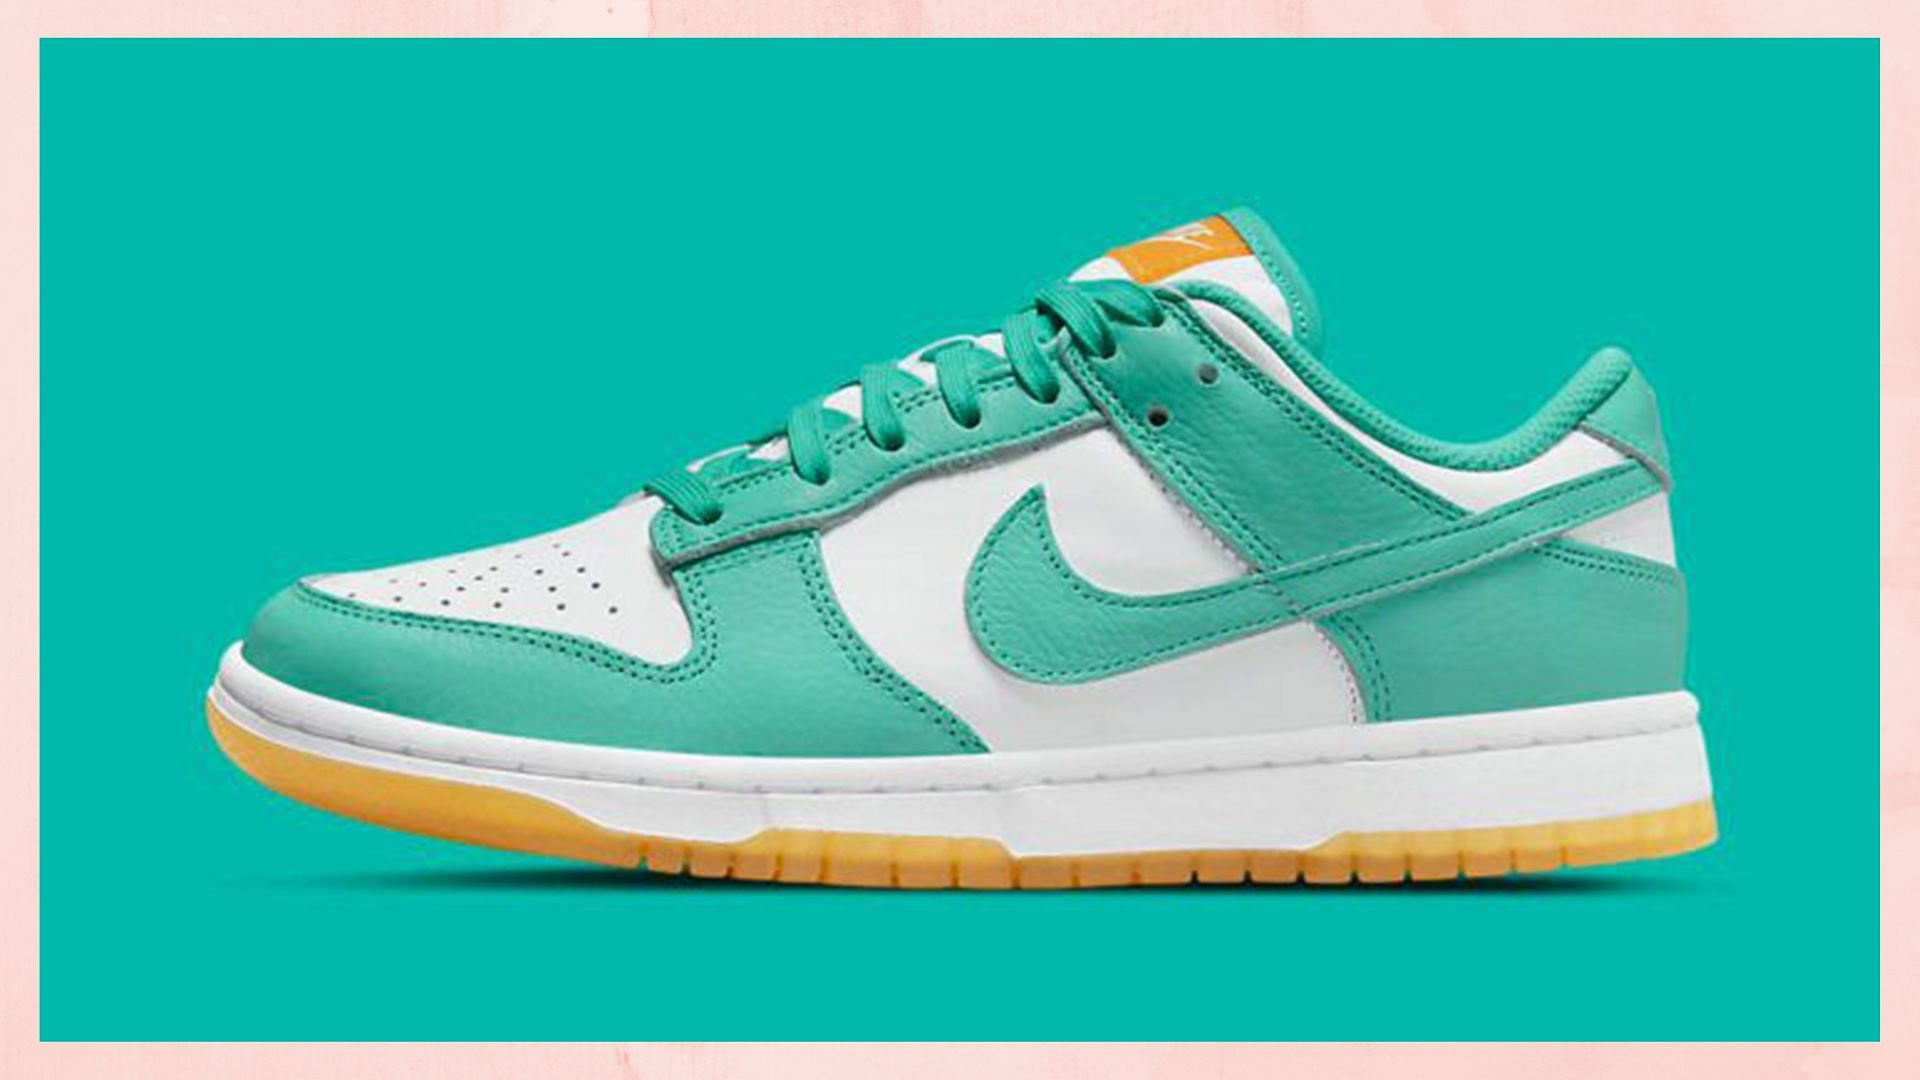 Where to buy Nike Dunk Low Teal Zeal shoes? Price, release date